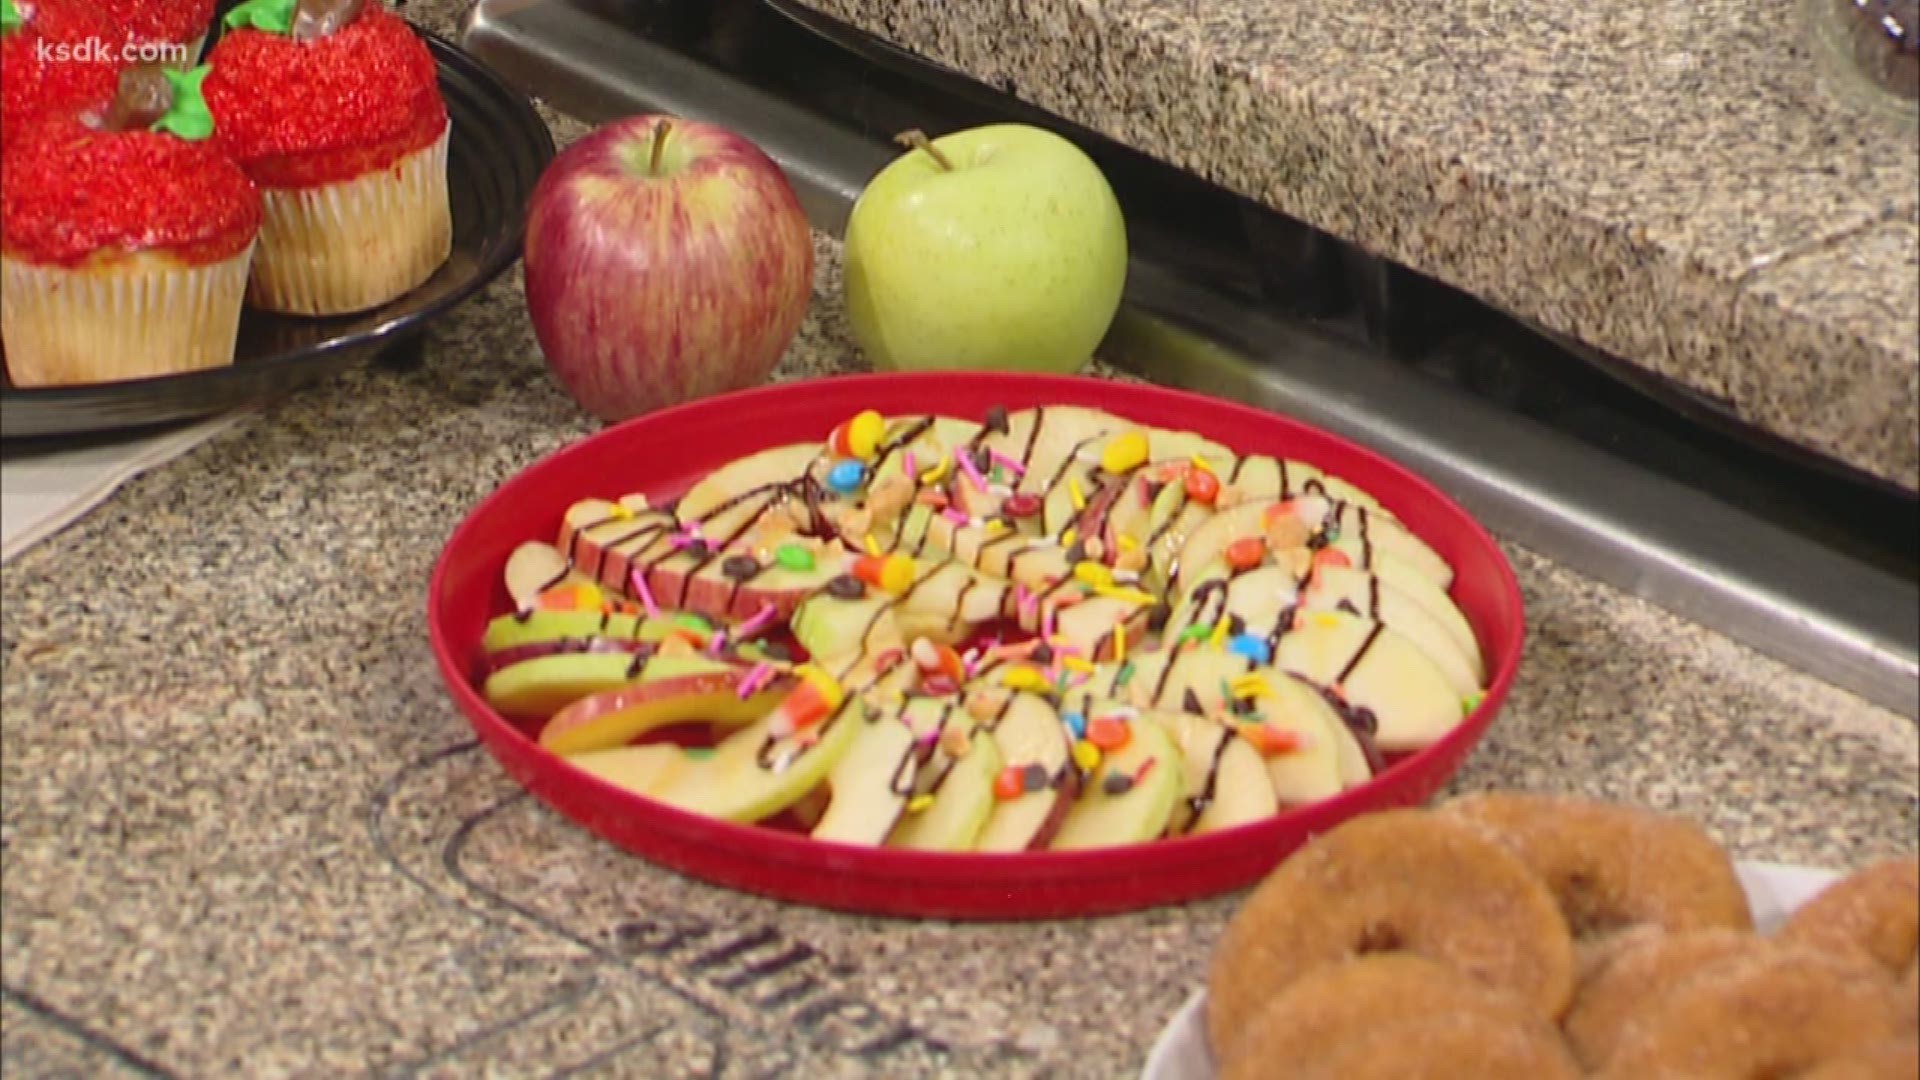 Lifestyle Blogger Liz Rotz teamed up with Eckert’s Farm to make these delicious Apple Nachos.